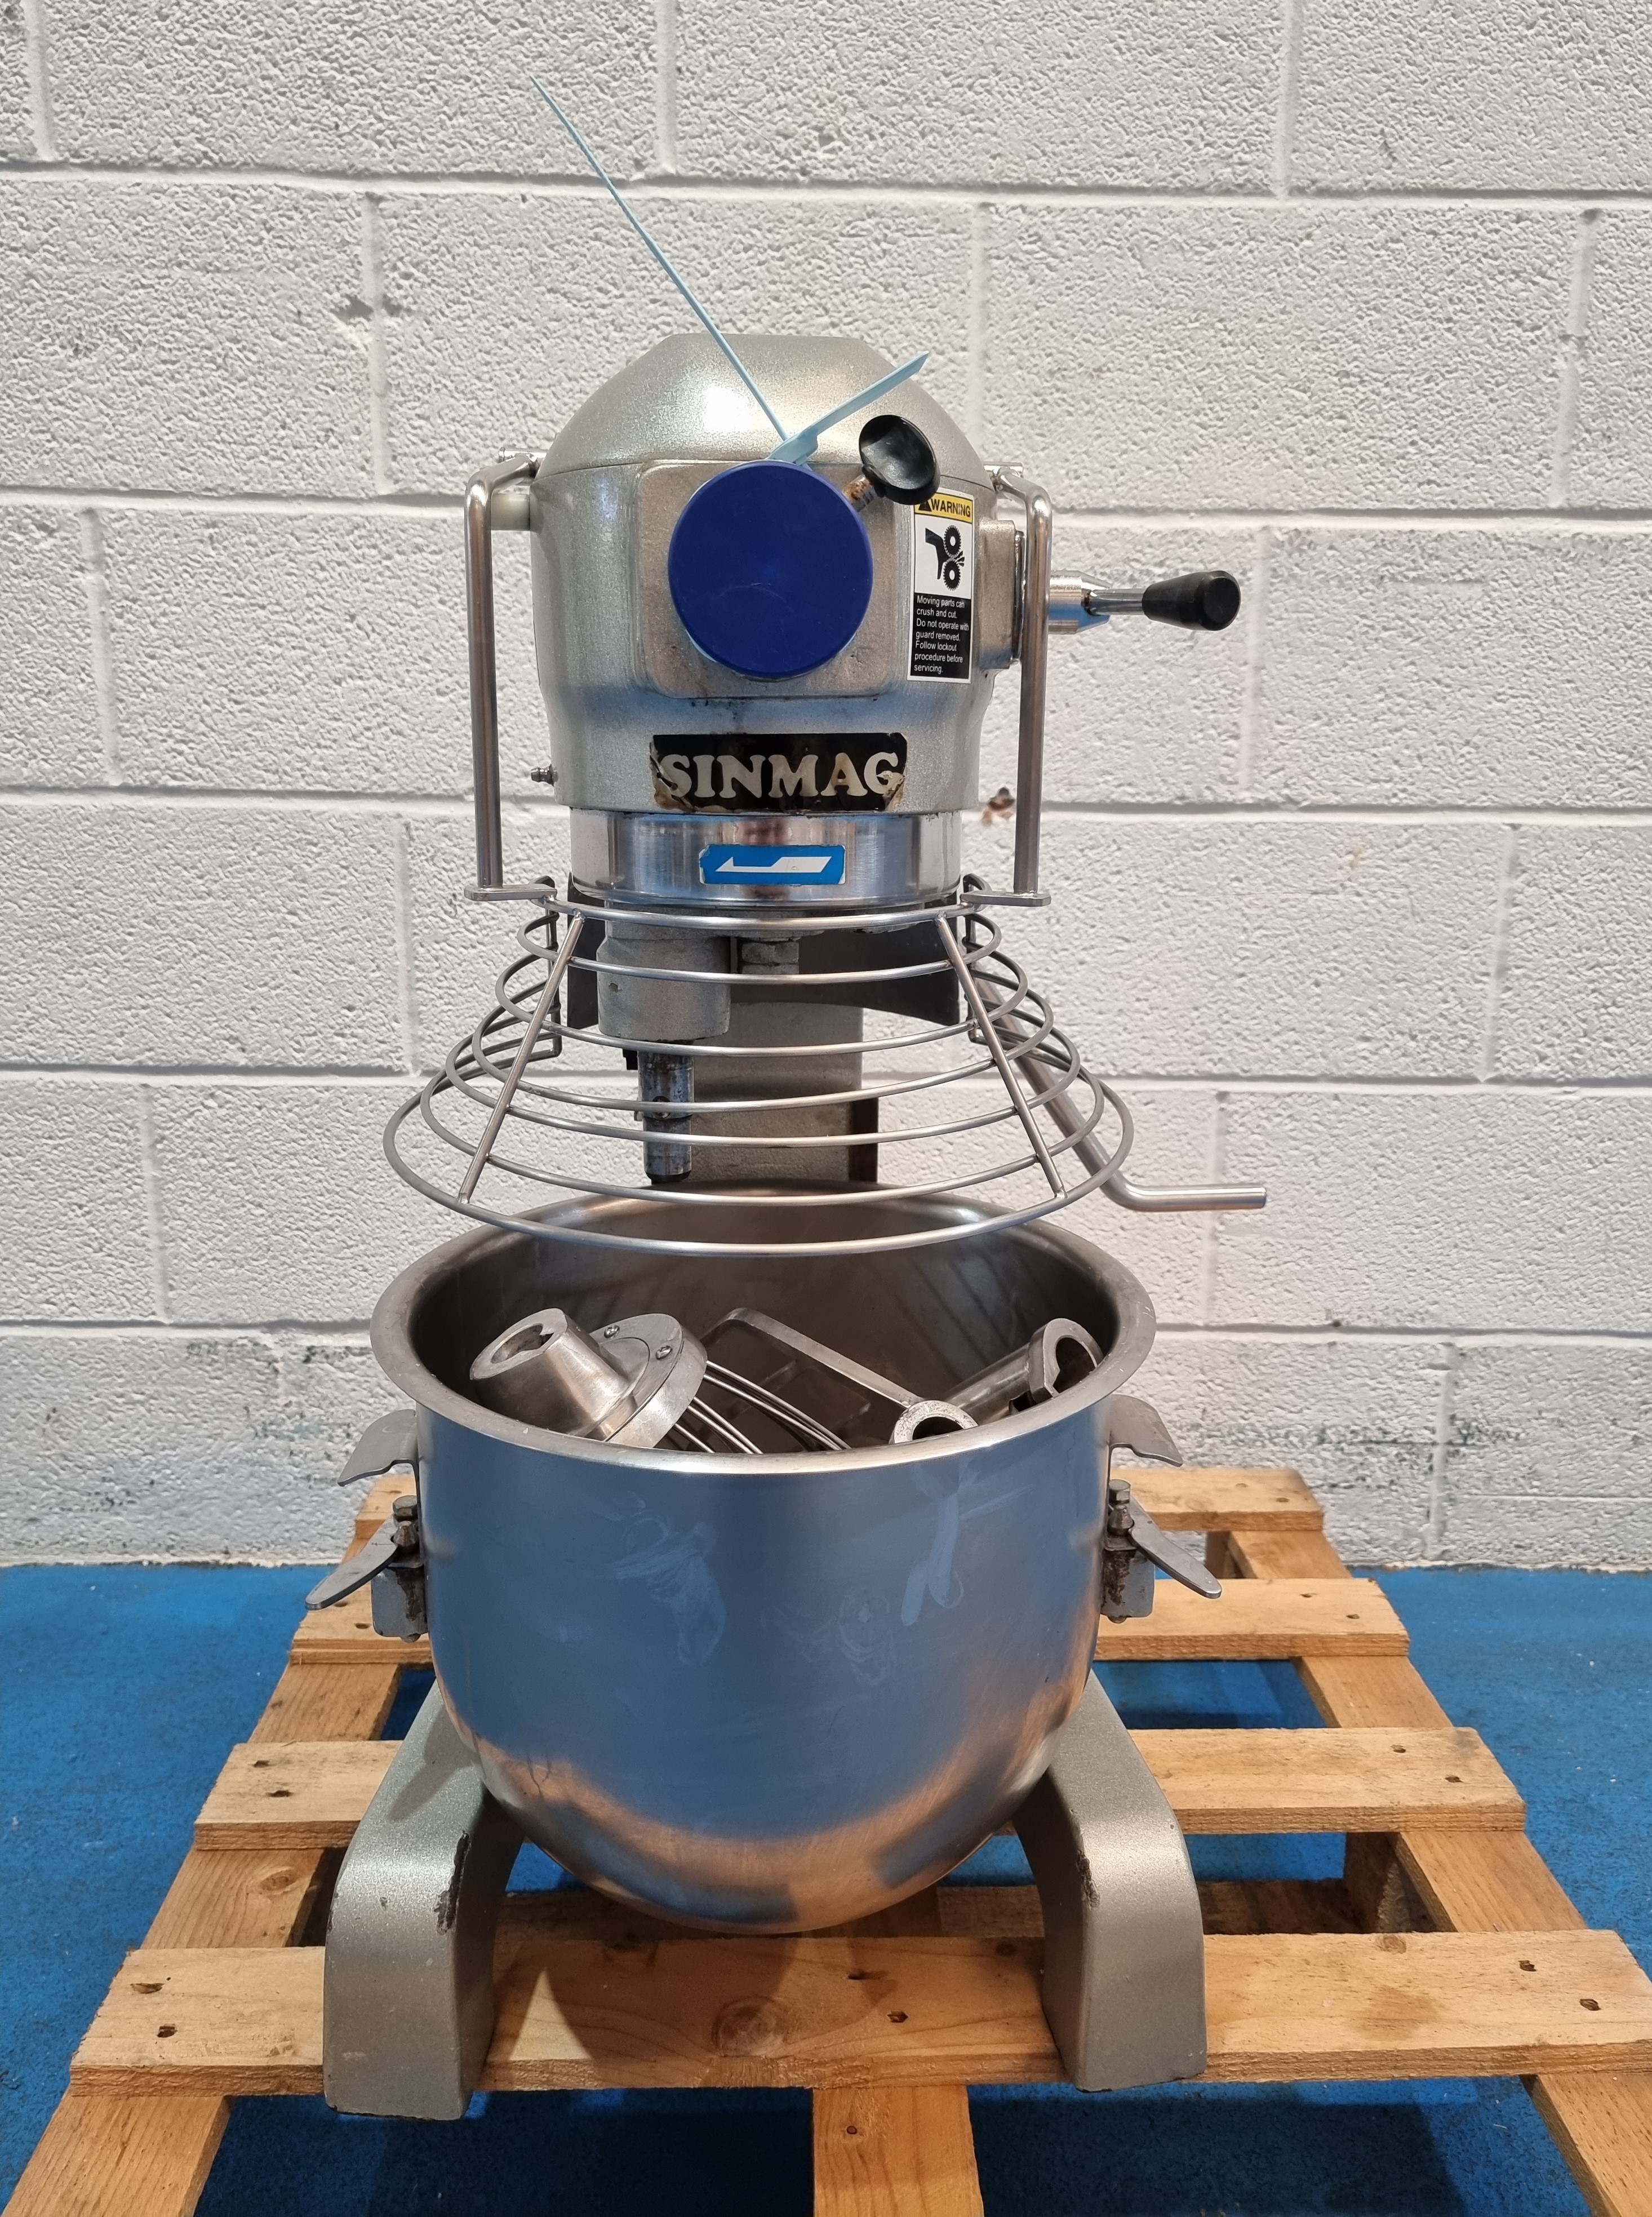 Sinmag 20 Litre Planetary Mixer